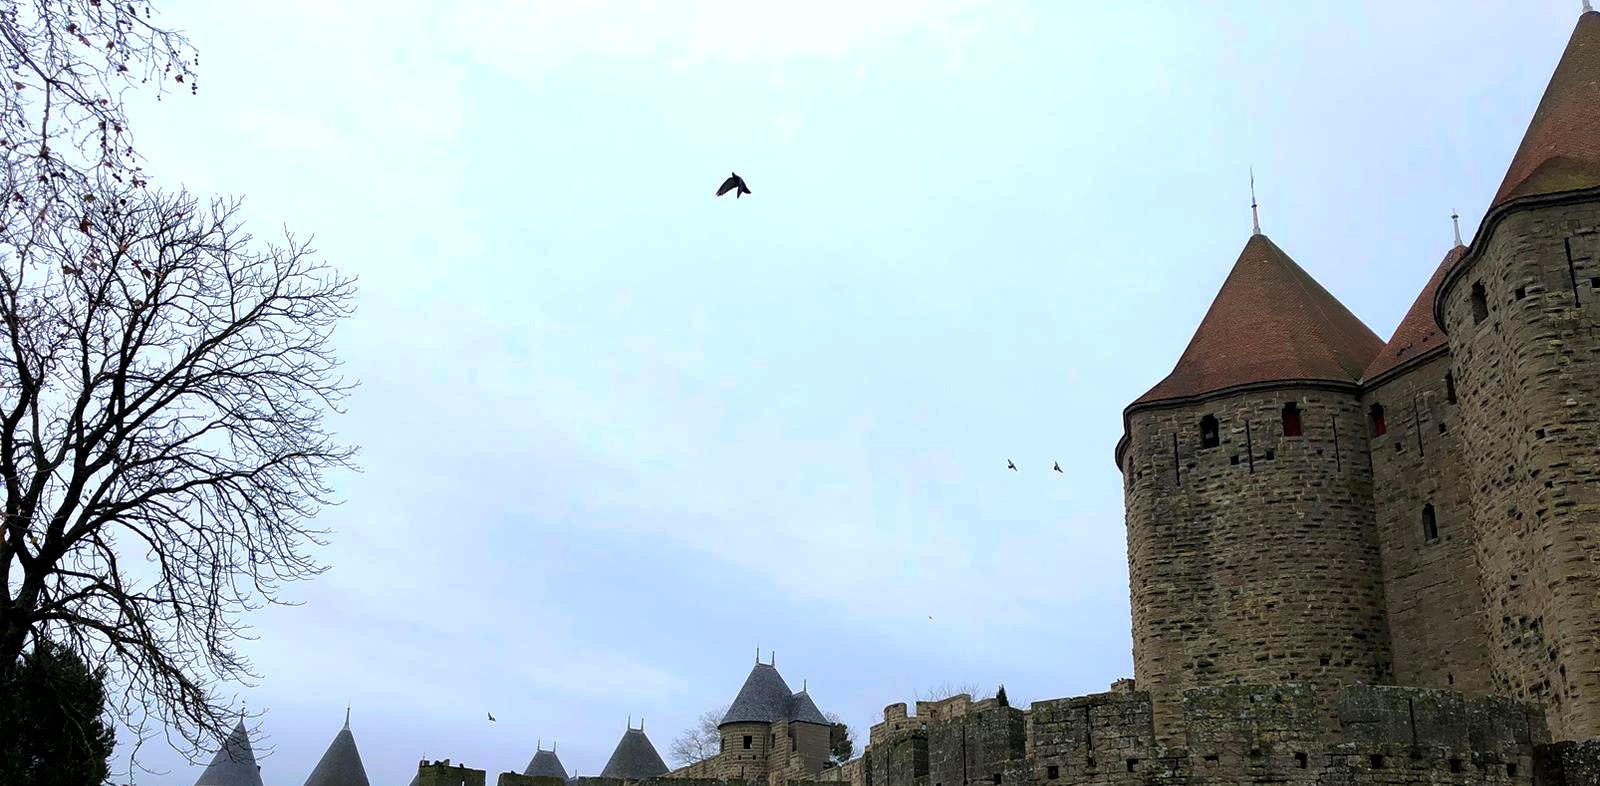 diving doves next to medieval walls